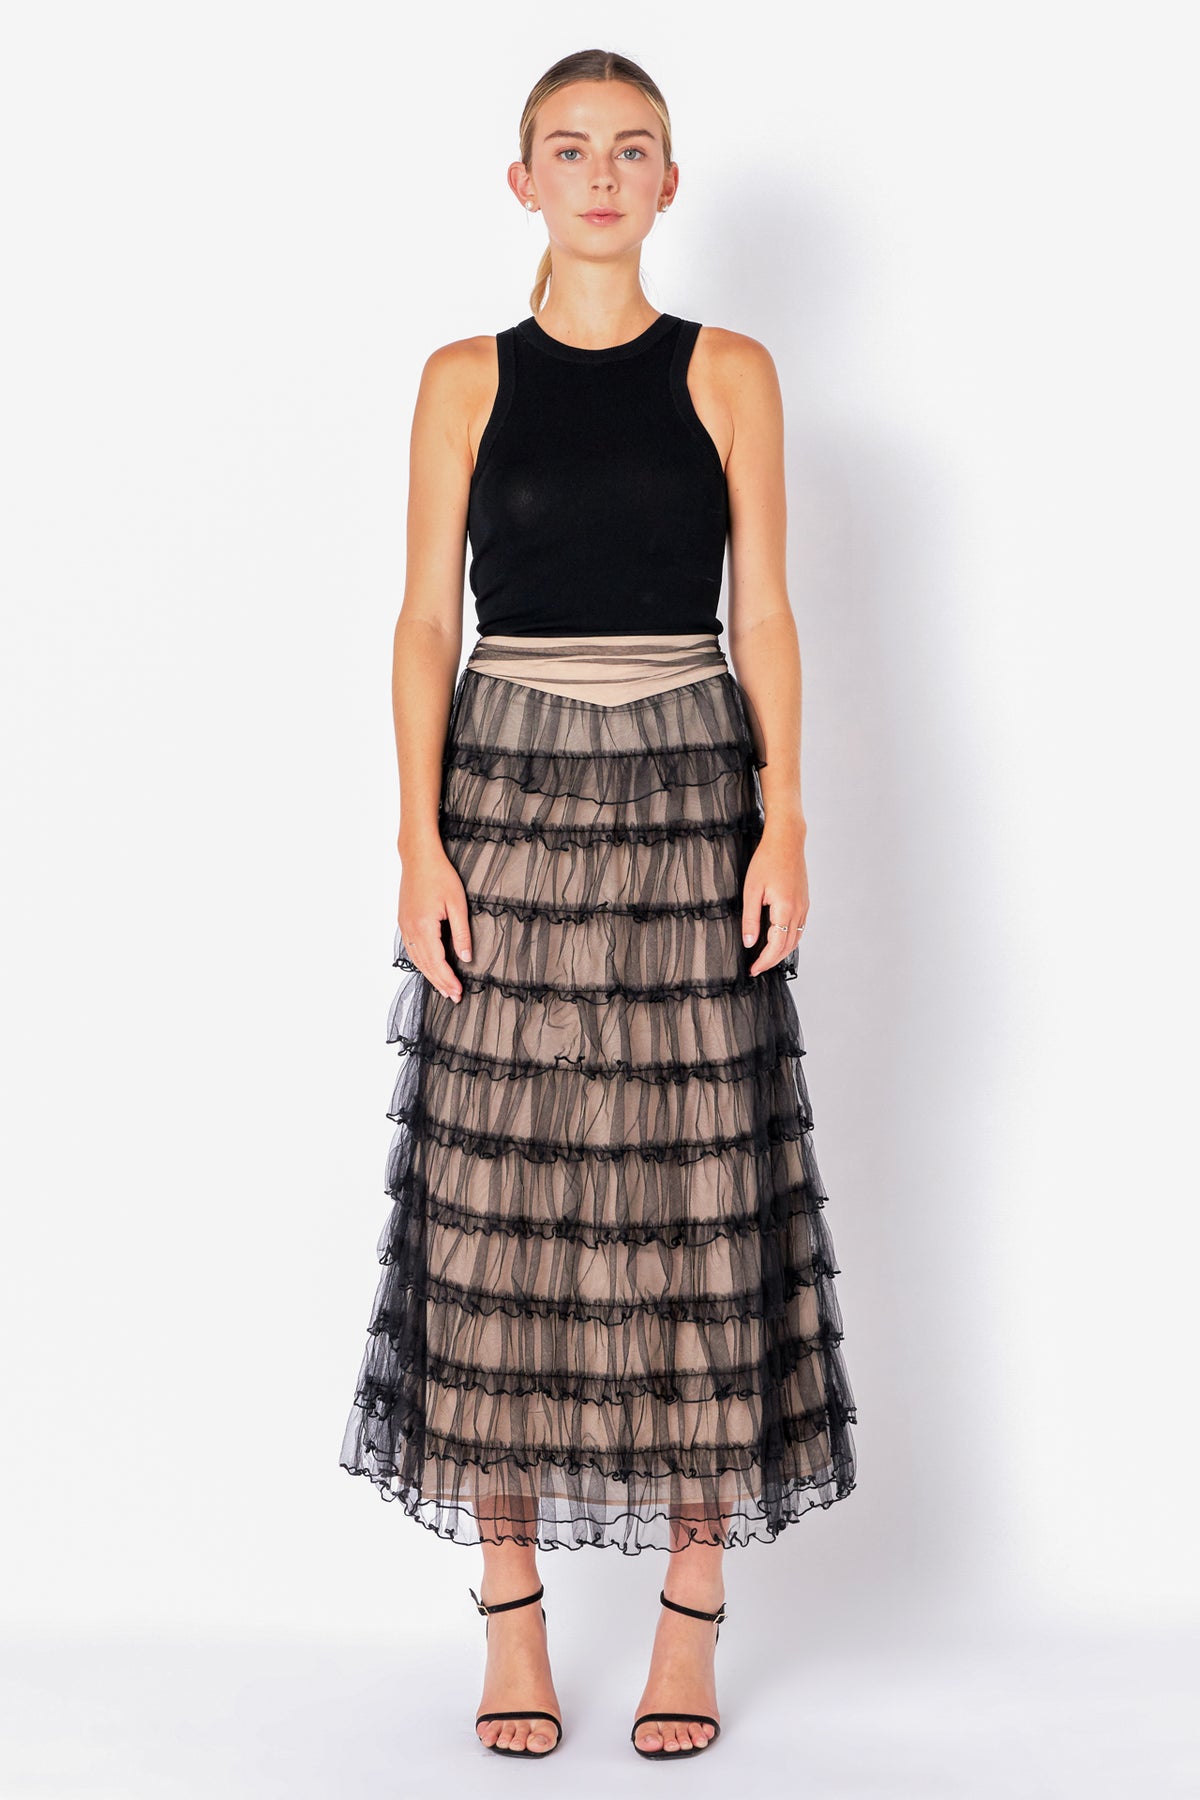 FREE THE ROSES - Layered Tulle Midi Skirt - SKIRTS available at Objectrare